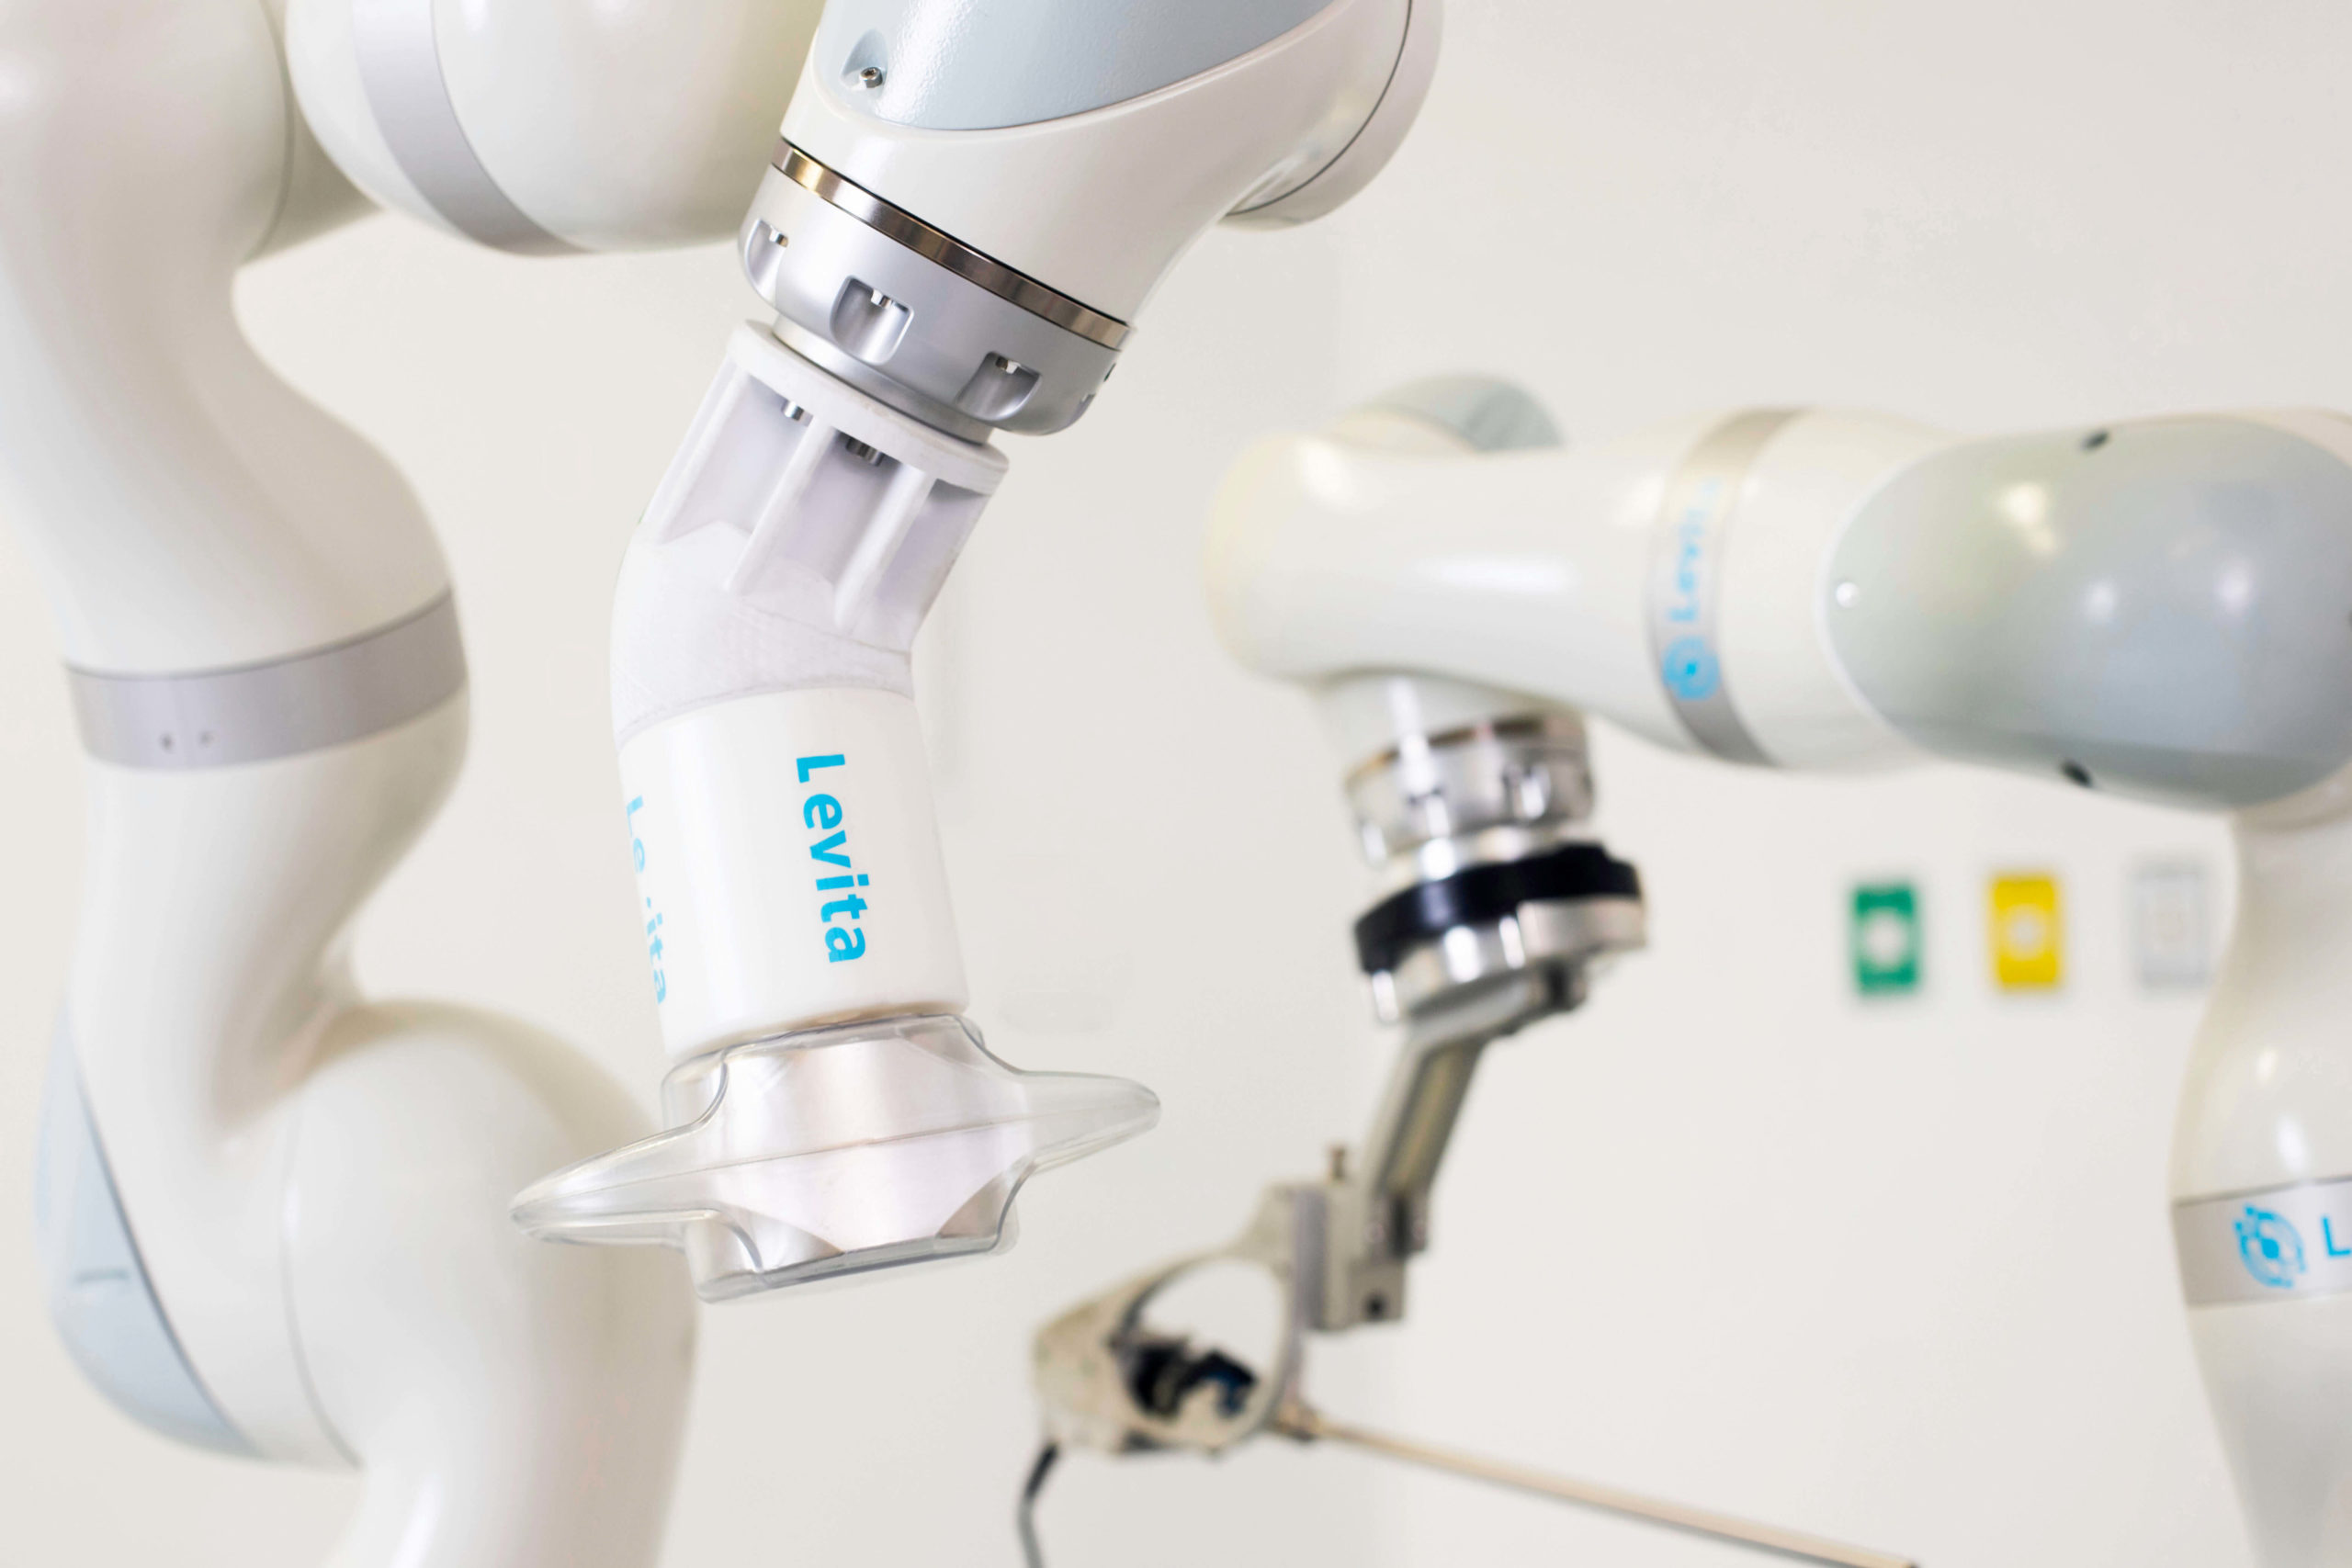 World’s First Magnetic Robotic-Assisted Surgeries Performed with Levita Magnetics’ Newest Platform